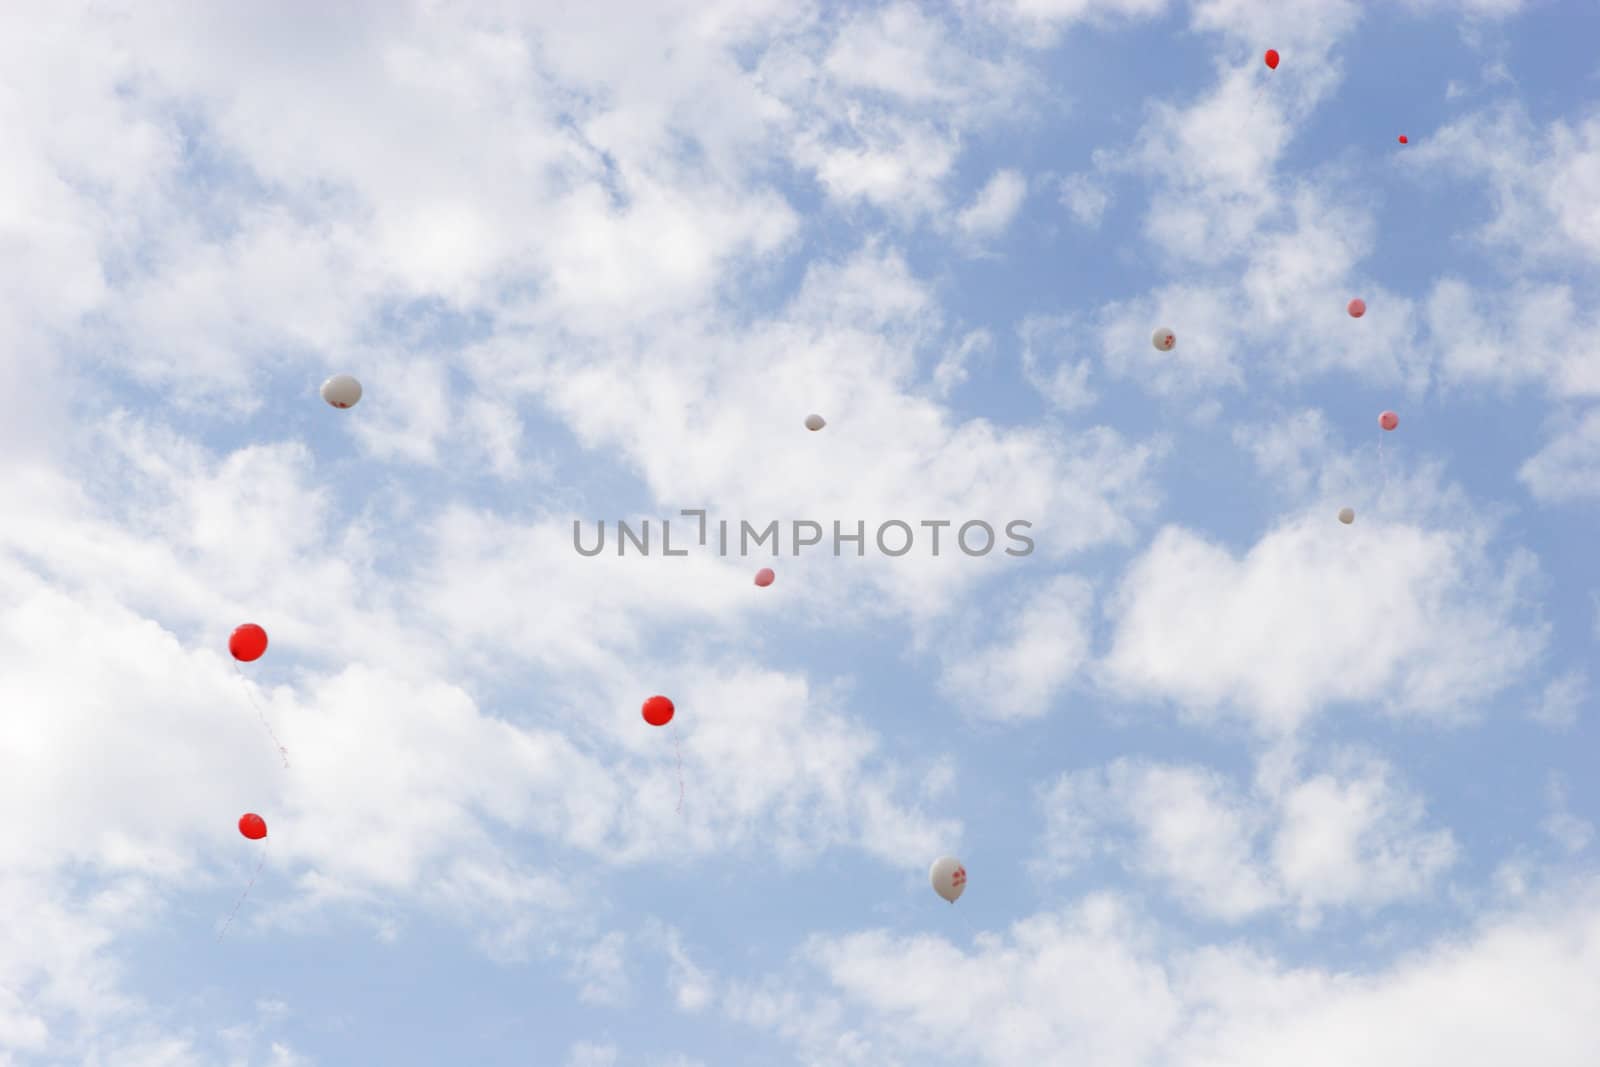 many holiday baloons are flying in the sky